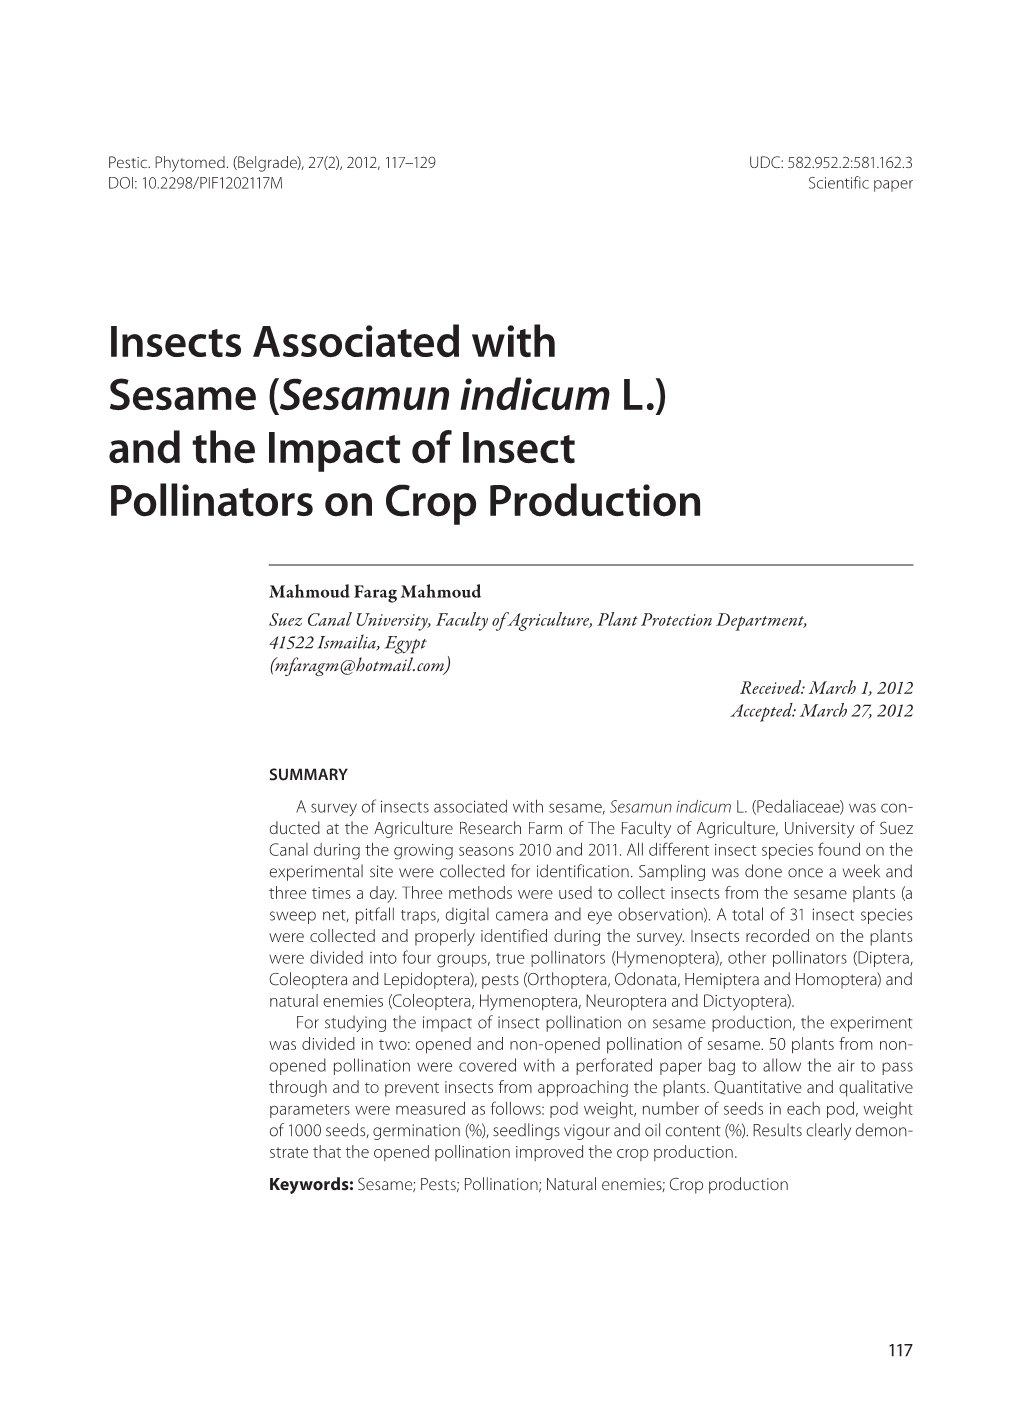 Insects Associated with Sesame (Sesamun Indicum L.) and the Impact of Insect Pollinators on Crop Production